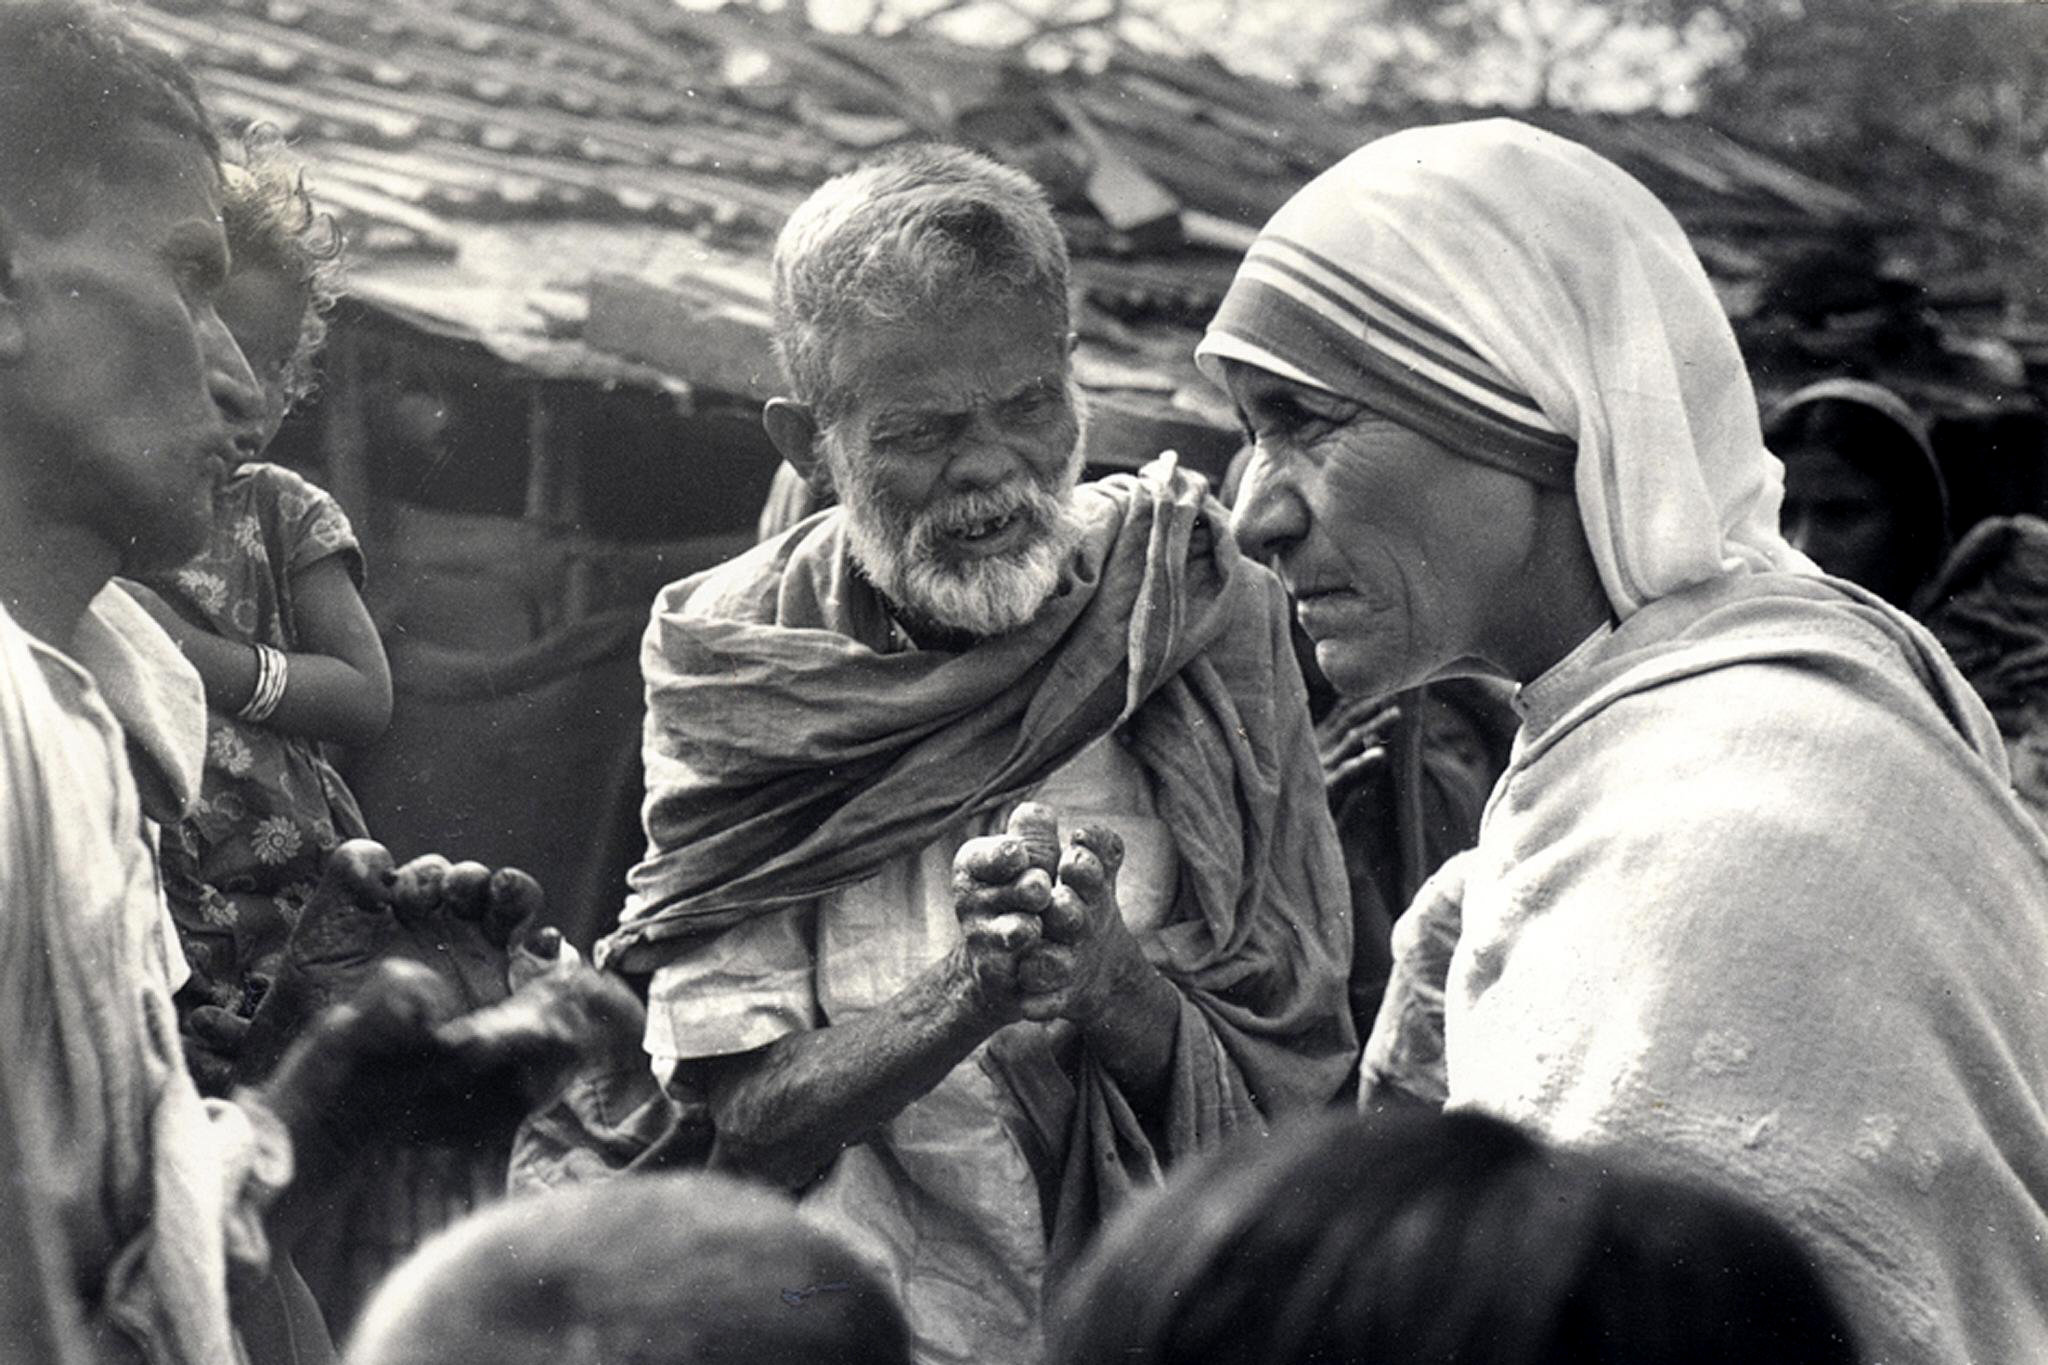 Biography of a Global Icon: Mother Teresa – The Compassionate Servant of the Needy